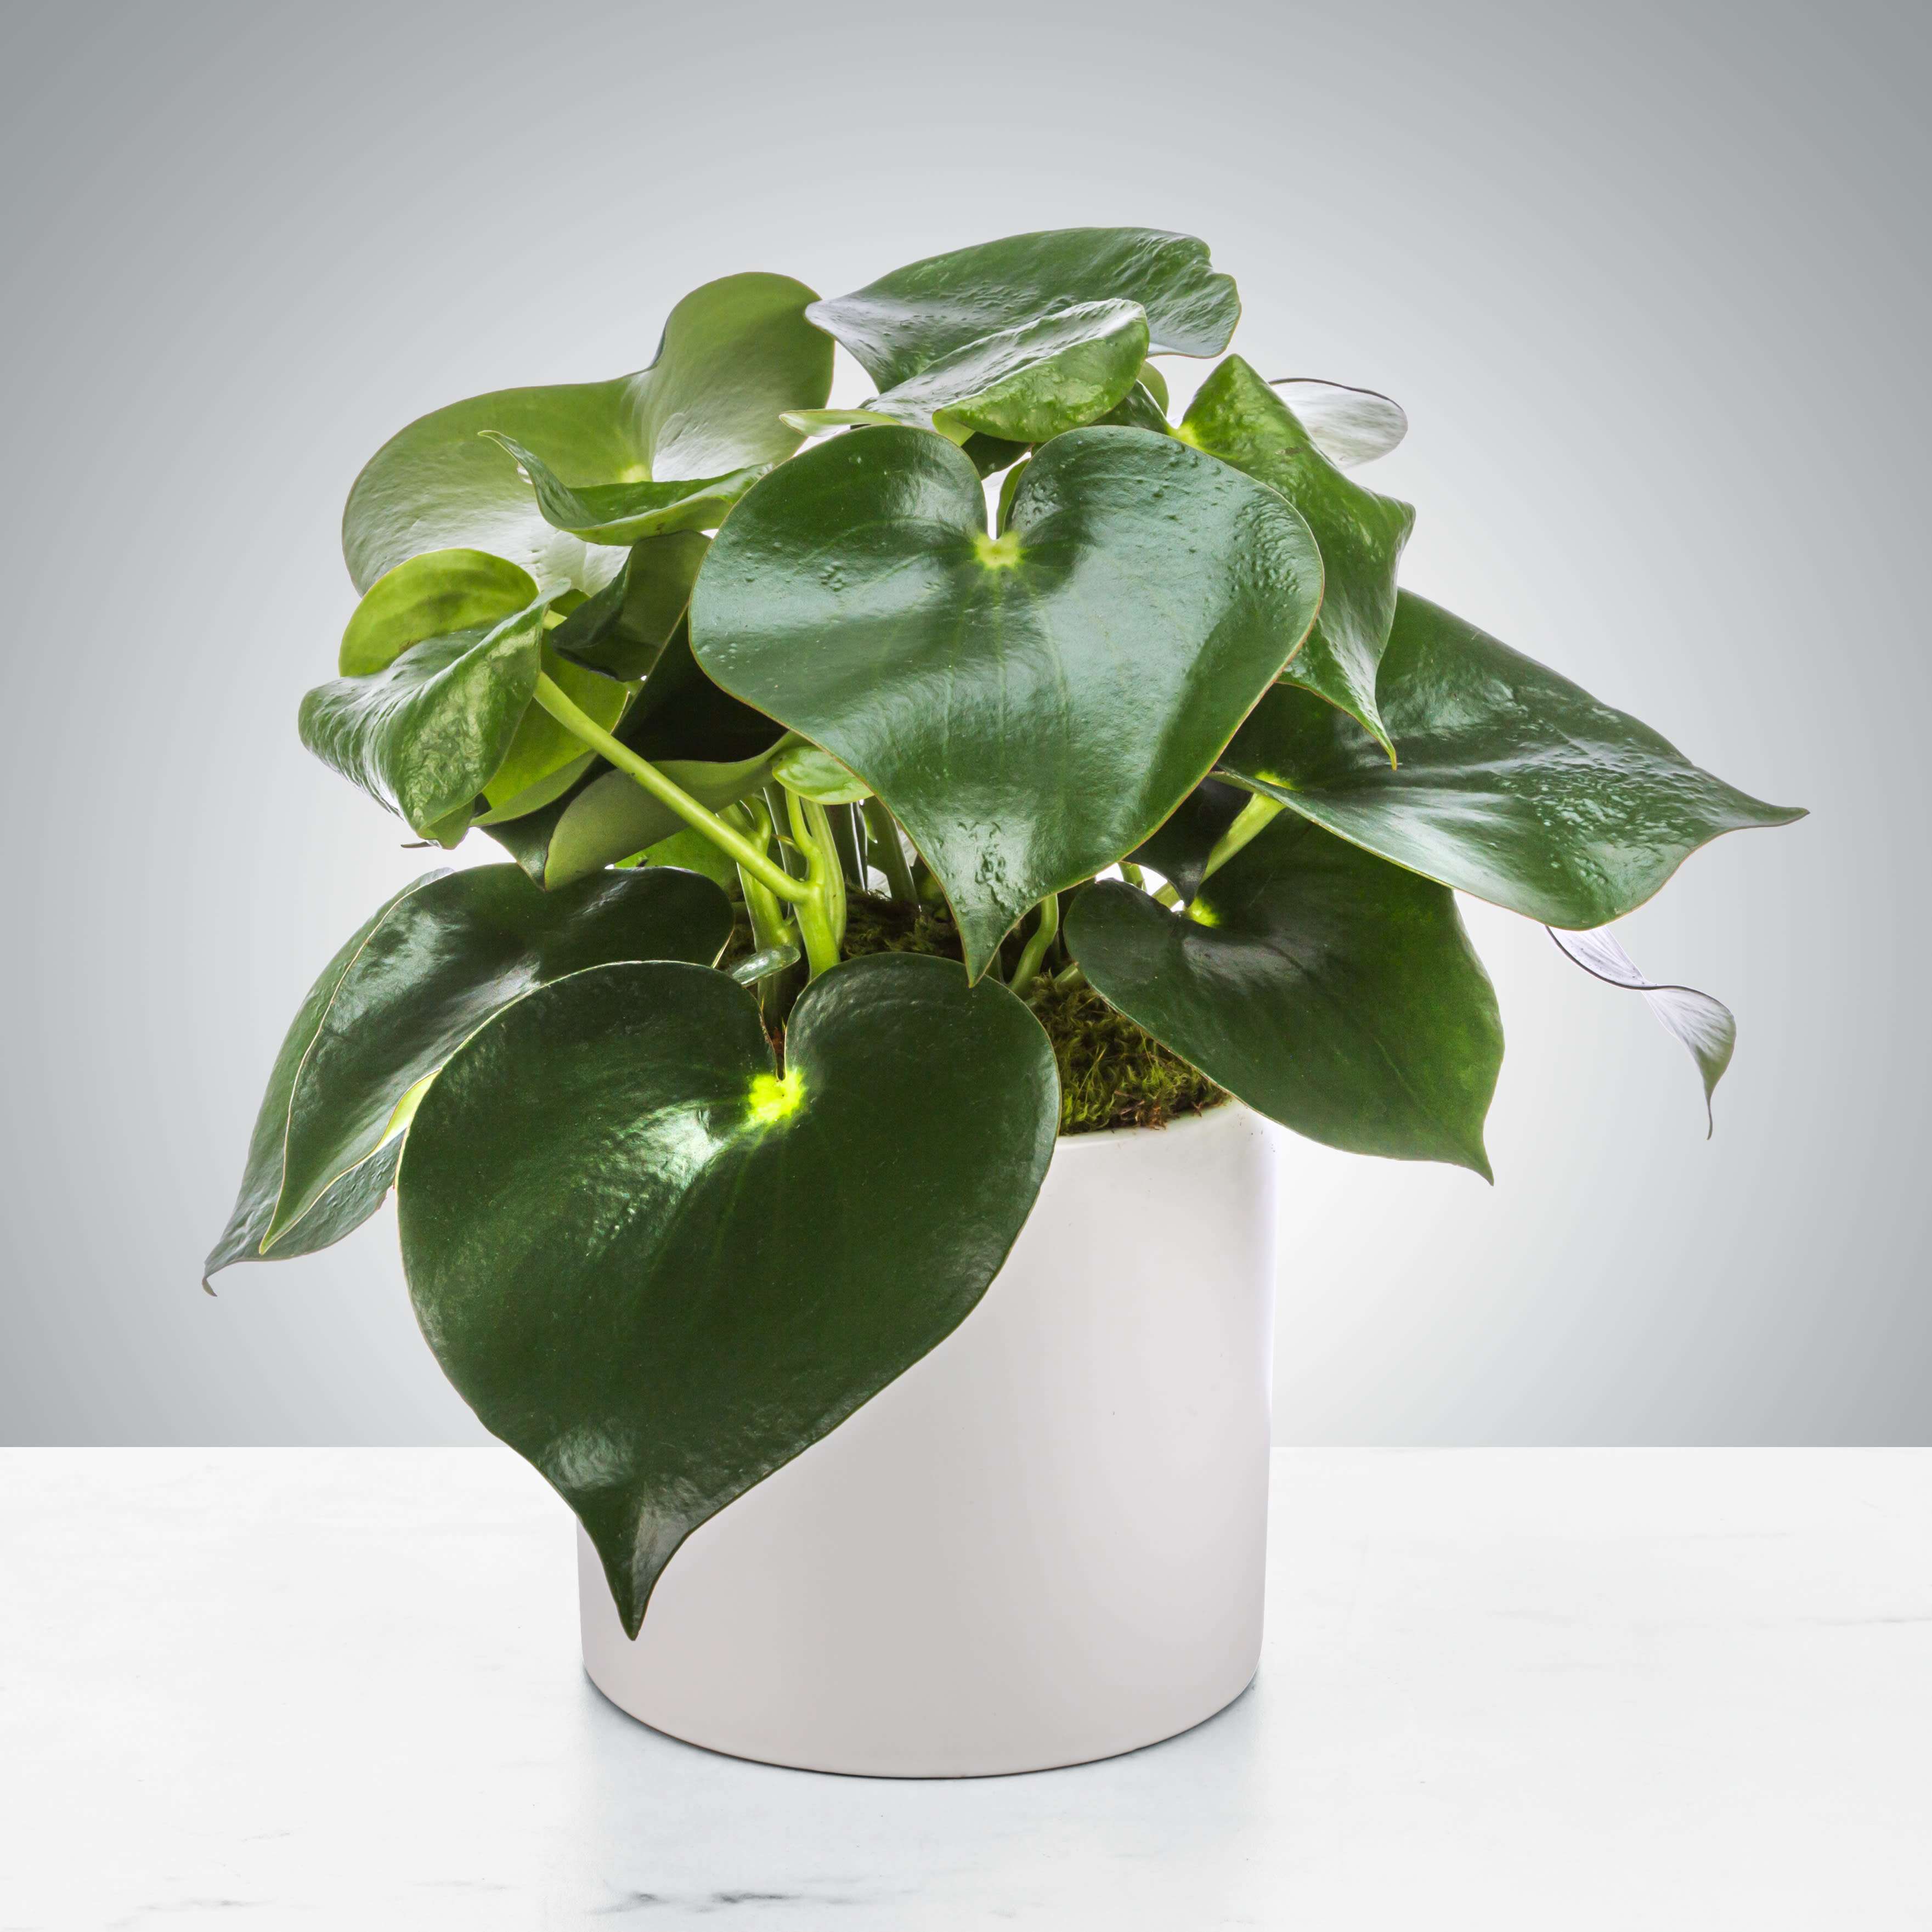 Raindrop Plant by BloomNation™ - The raindrop plant, also known as the Peperomia polybotrya, does well in indirect light. A cute addition to any table or shelf, the shiny leaves are enjoyed by many. Send it as a gift for somebody's desk or windowsill.